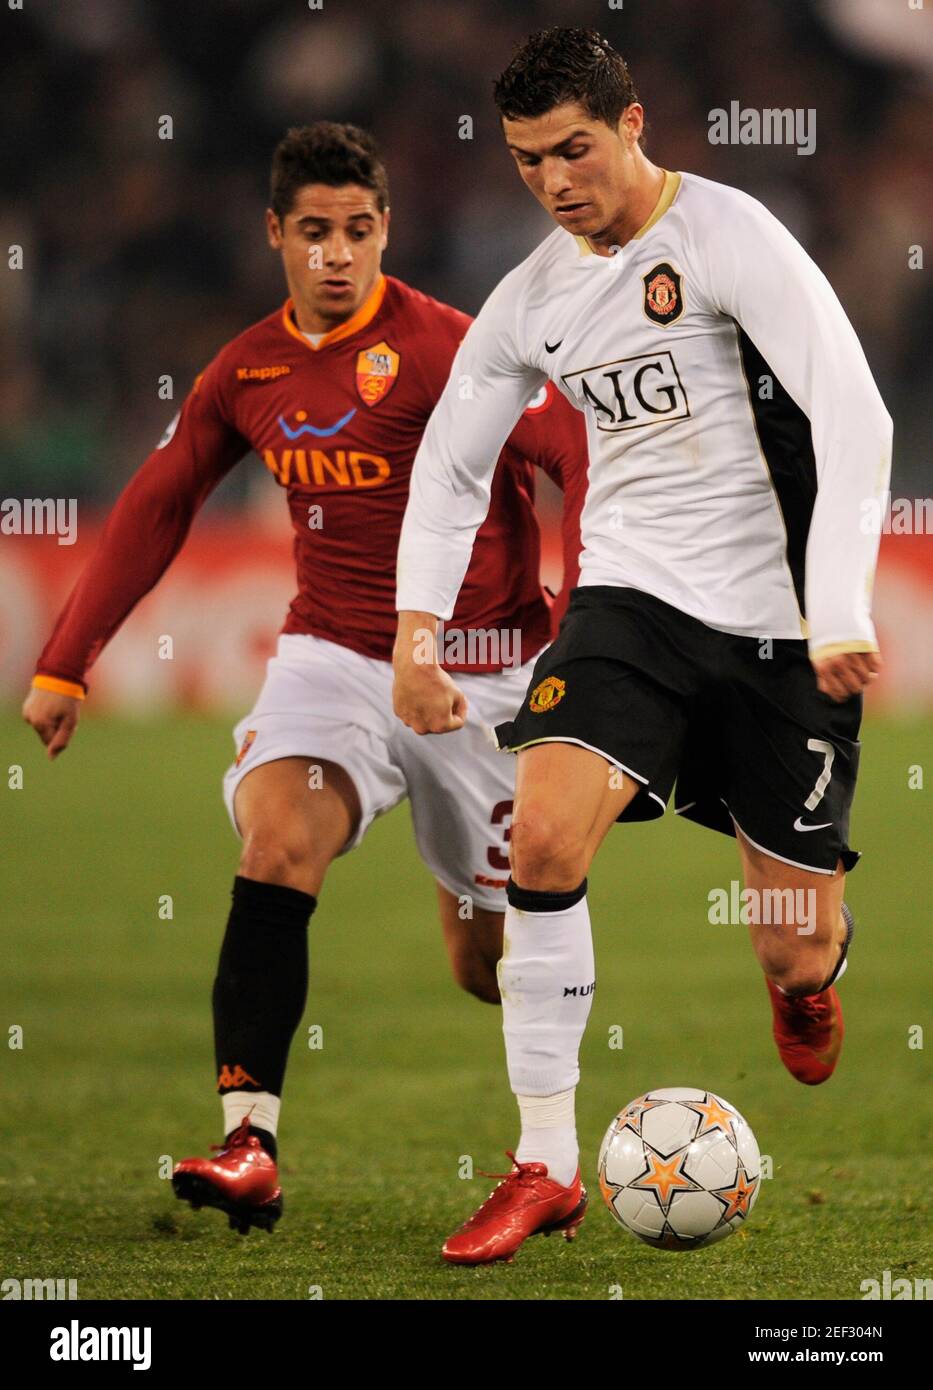 Football - AS Roma v Manchester United - UEFA Champions League Quarter  Final First Leg - The Olympic Stadium, Rome, Italy - 07/08 - 1/4/08 AS  Roma's Cicinho in action against Manchester